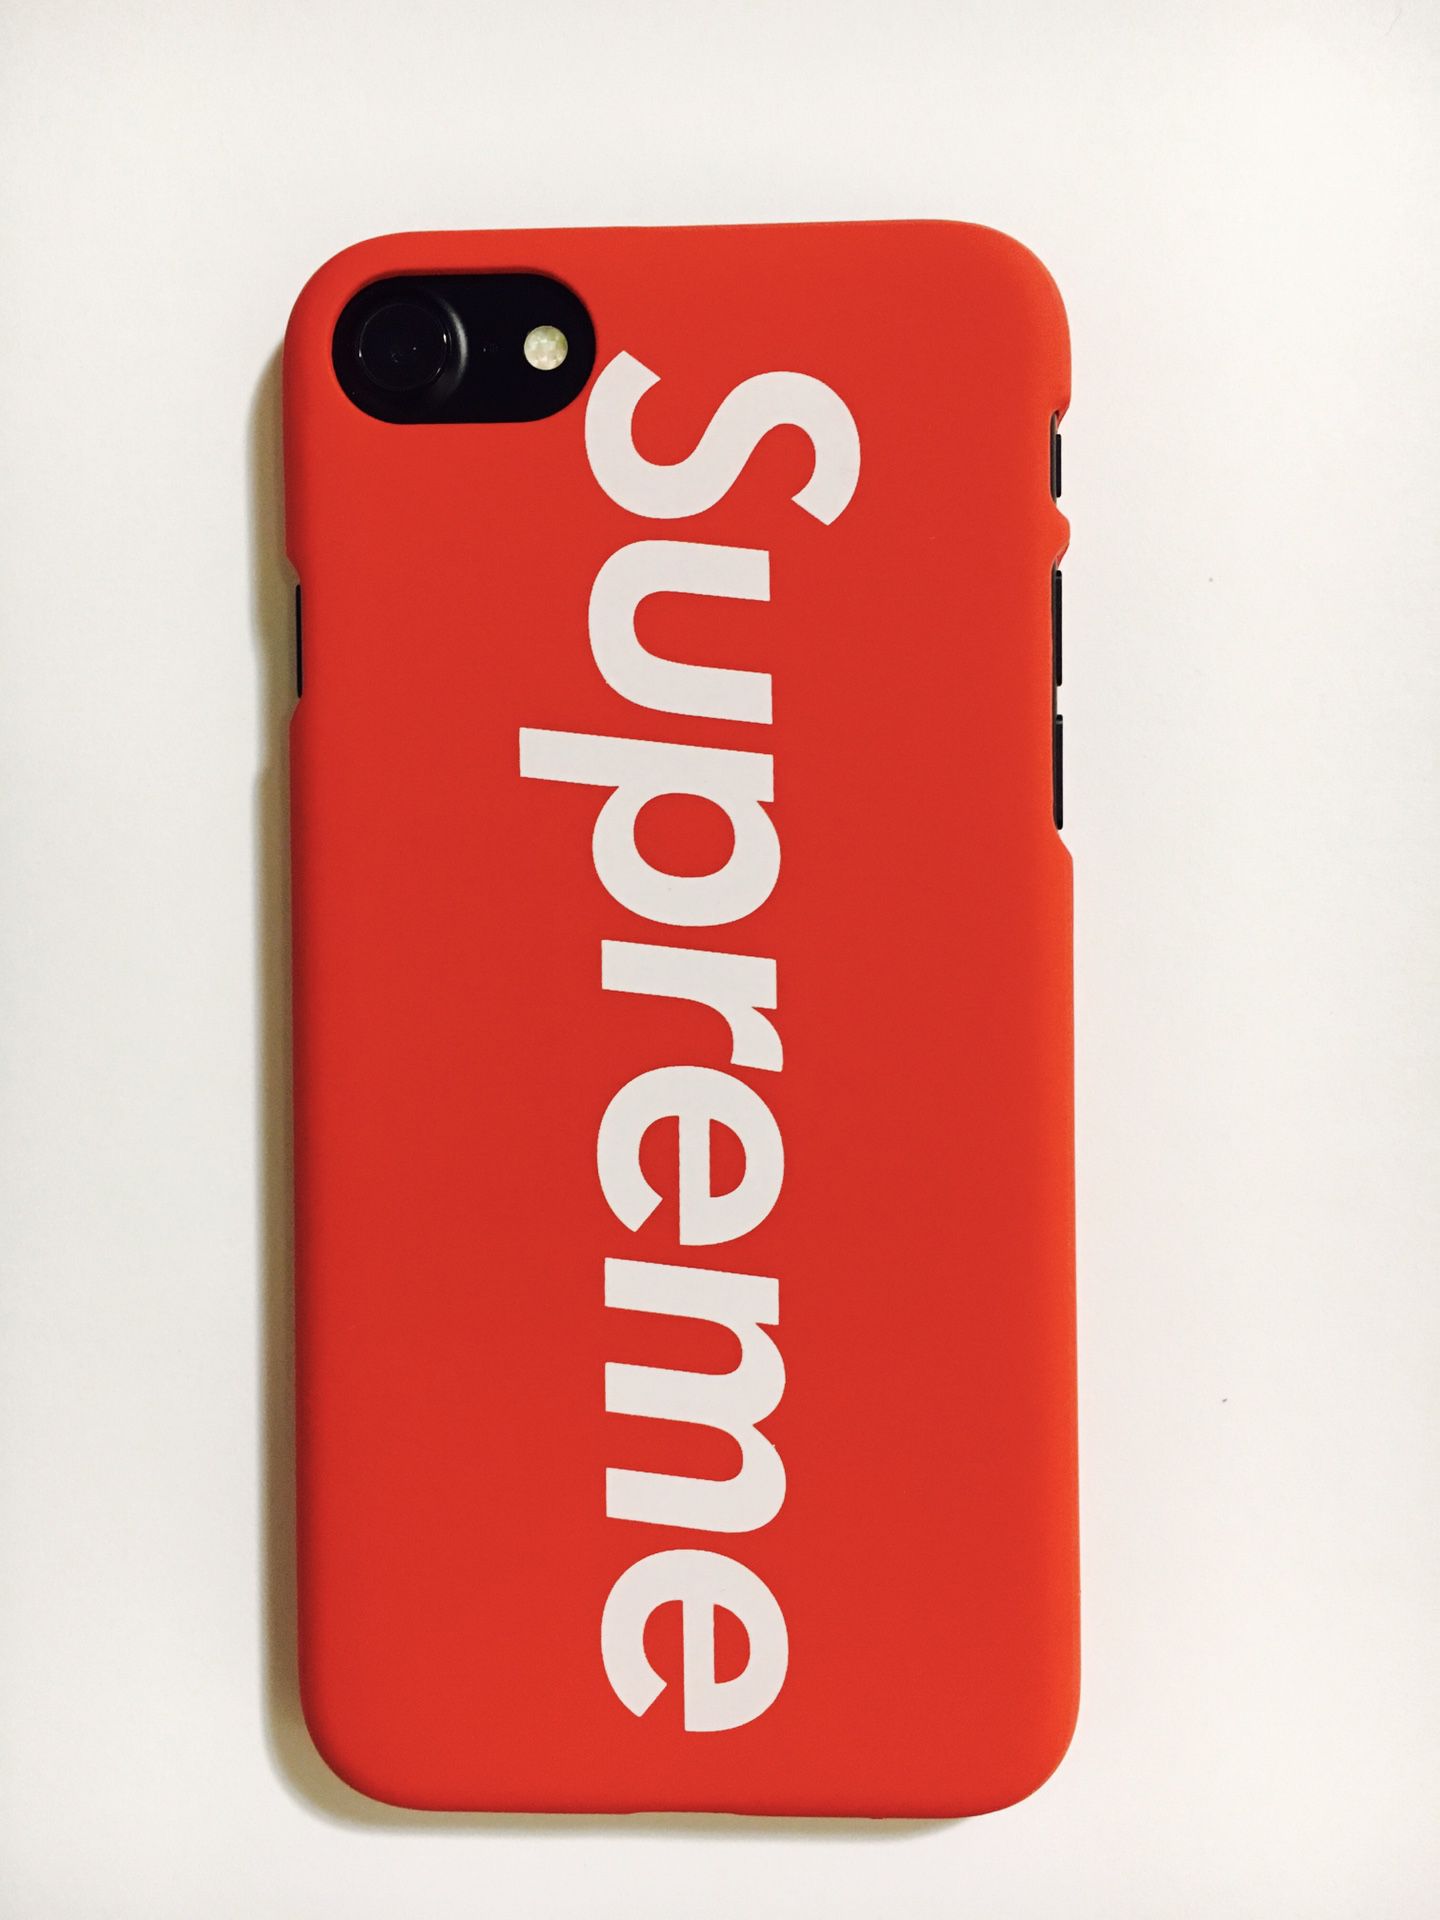 NEW SUPREME RED GOLD PATTERN iPhone 6 / 6S Plus Case Cover